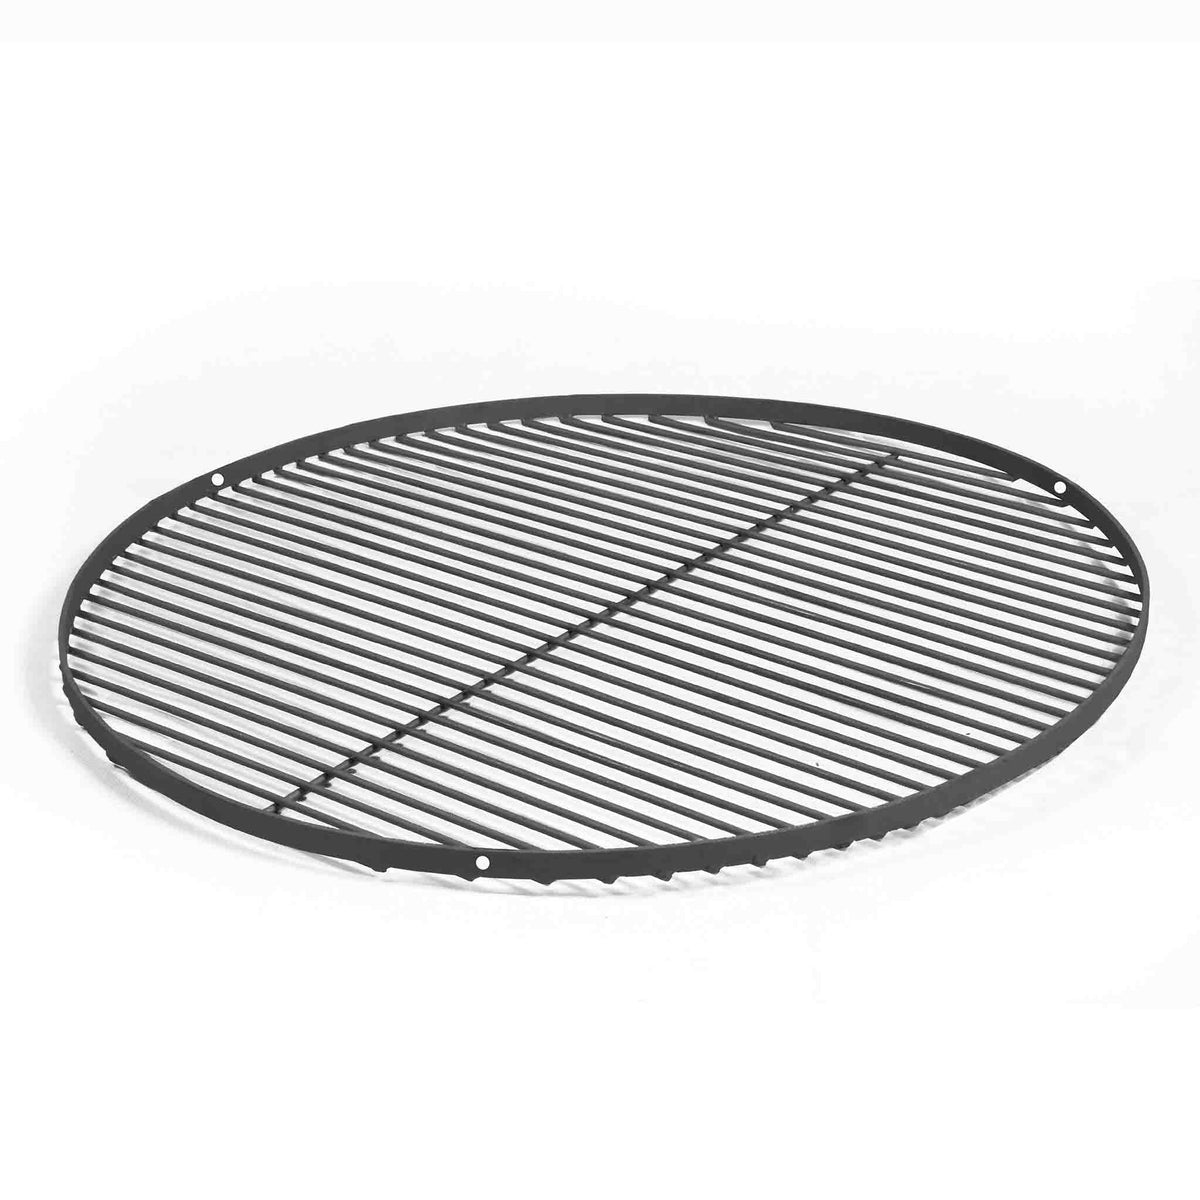 Steel Grate for Fire Bowl by Roseland Furniture